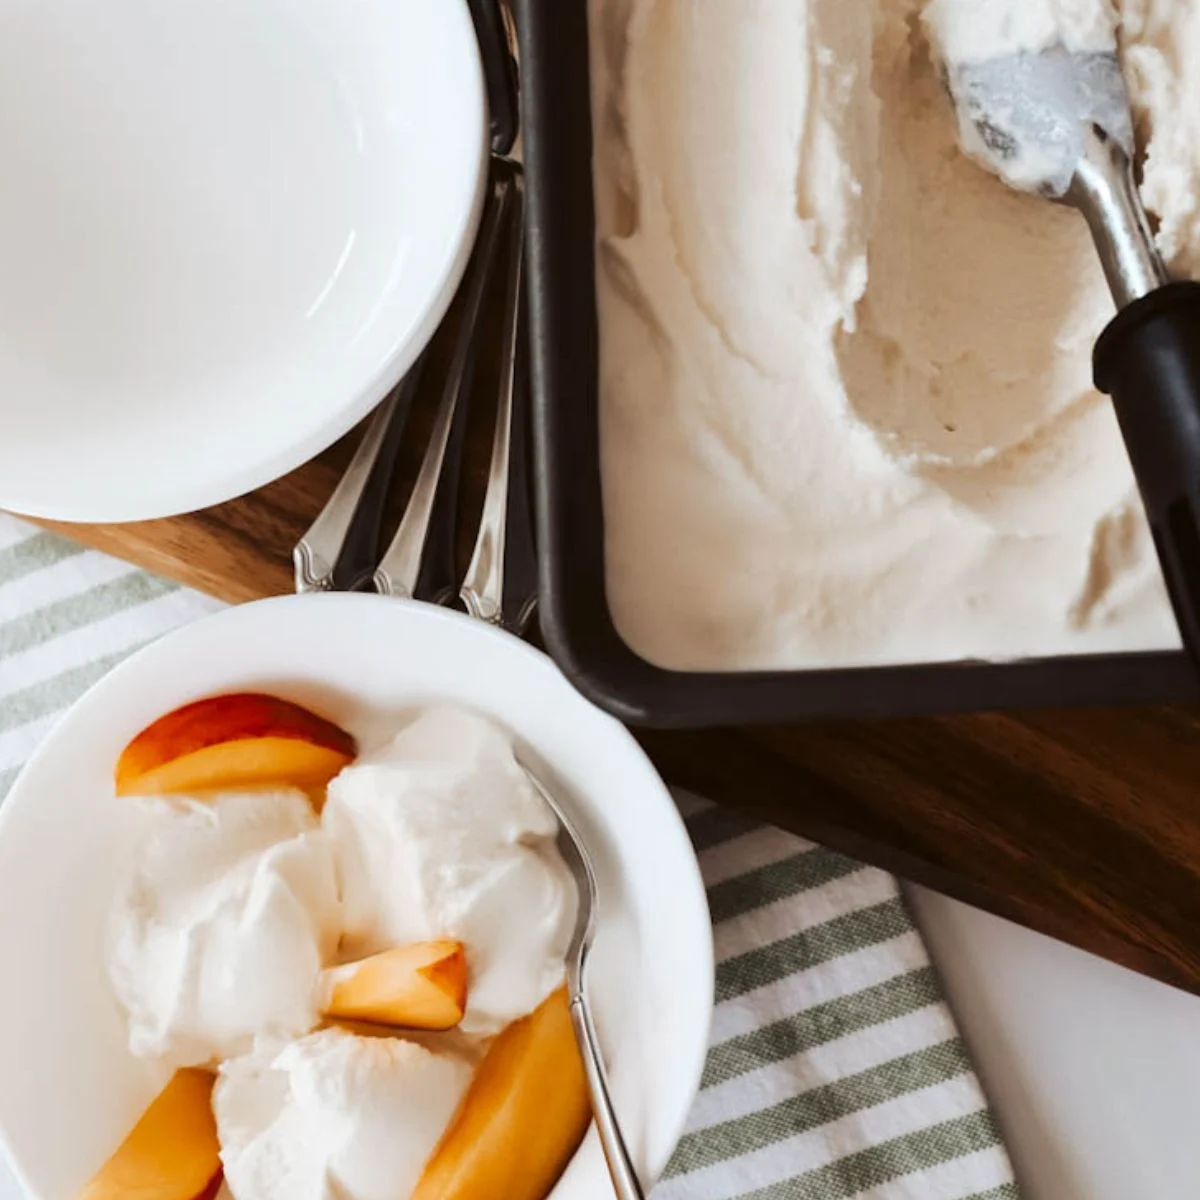 How To Make Homemade Peach Ice Cream Without An Ice Cream Maker